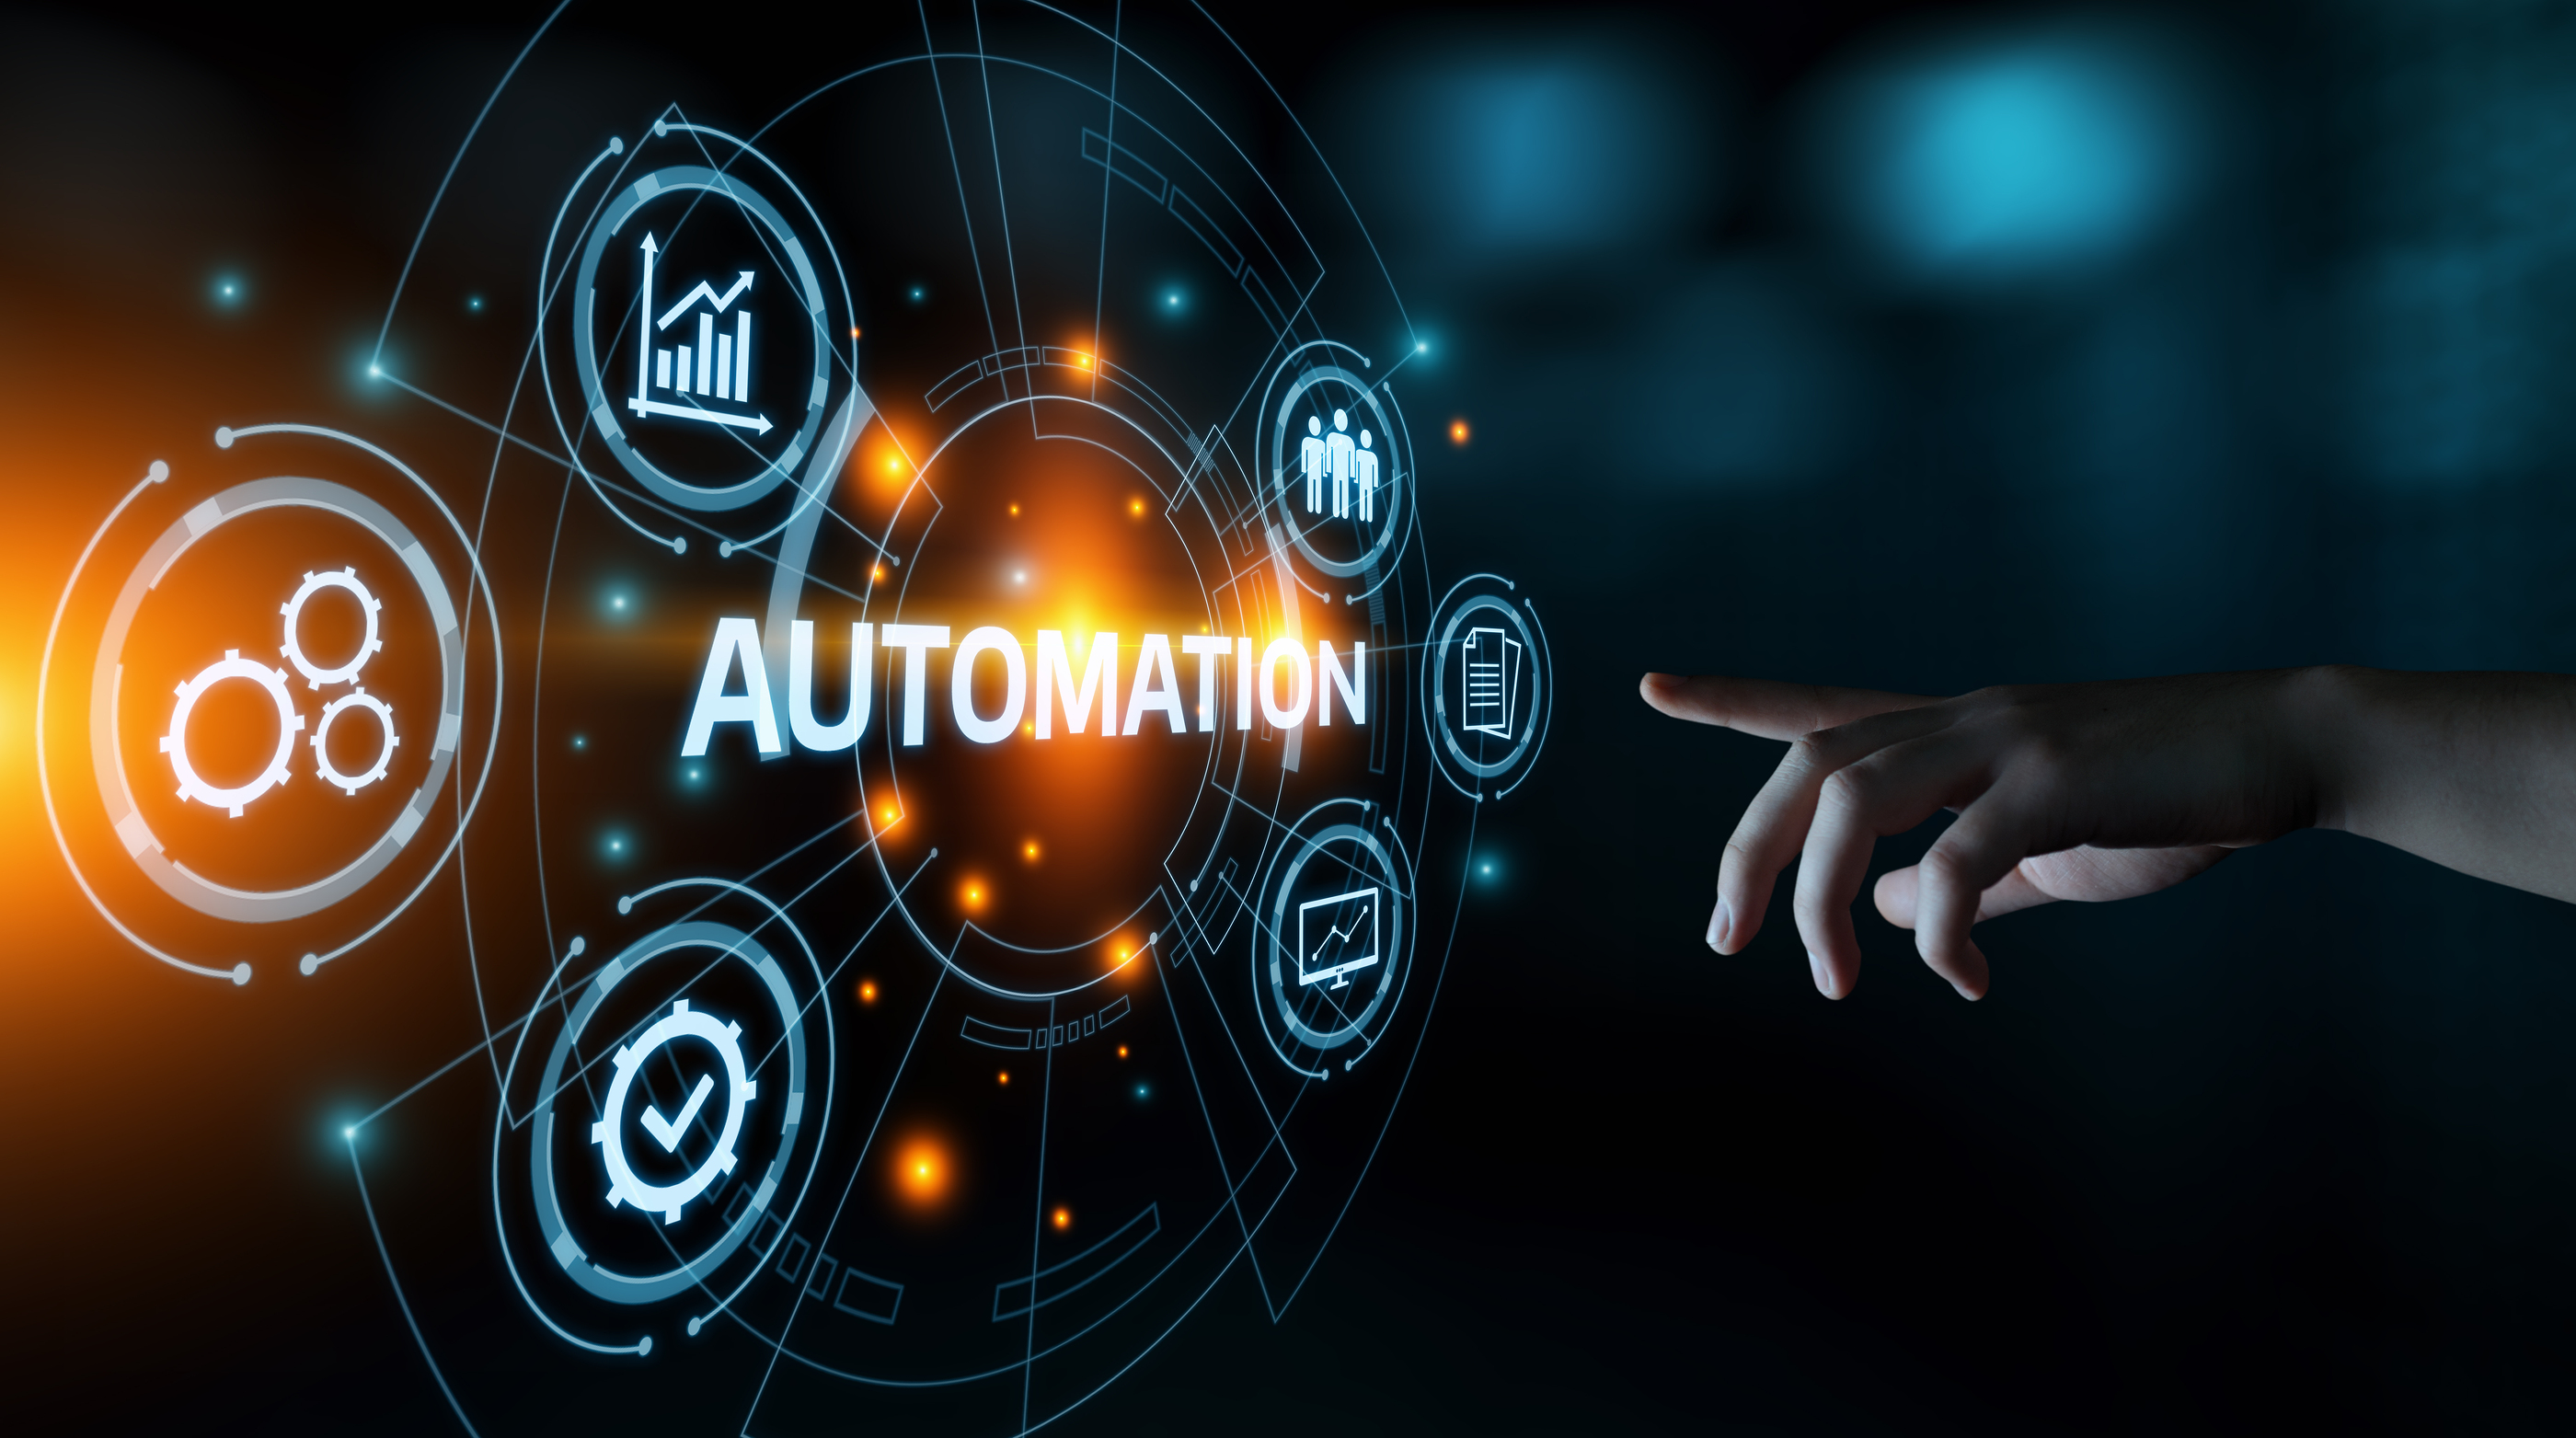 Use Easy IT Automations to Drive More Business in 2020